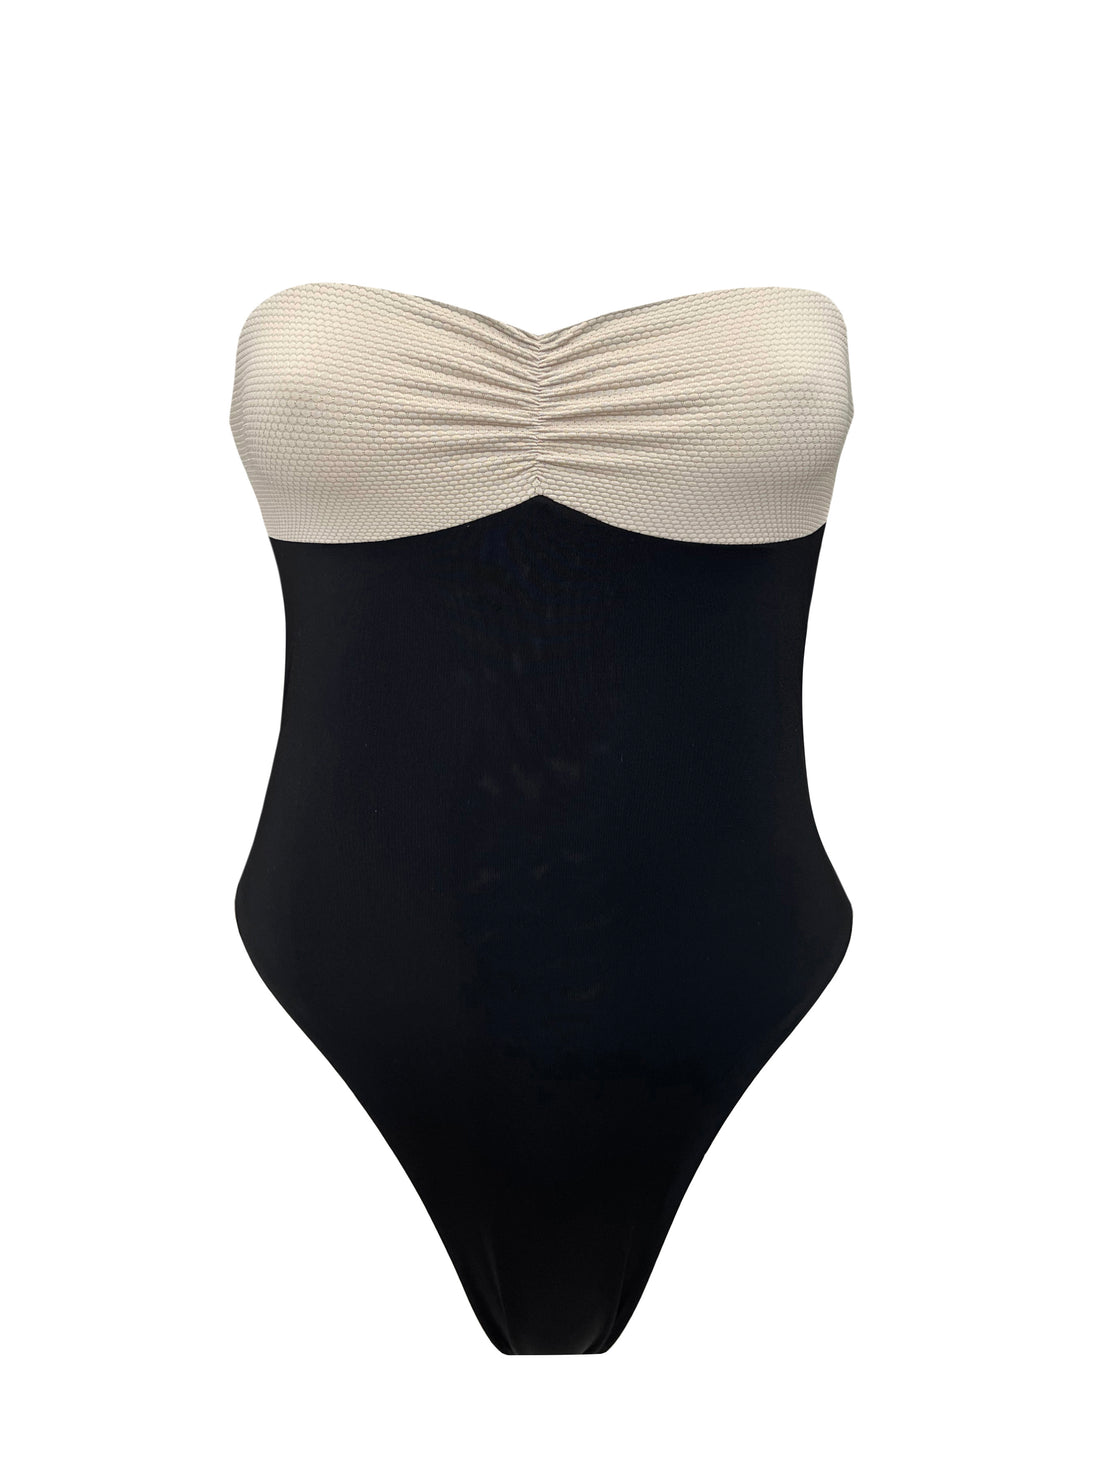 LENOX ONE PIECE | OYSTER